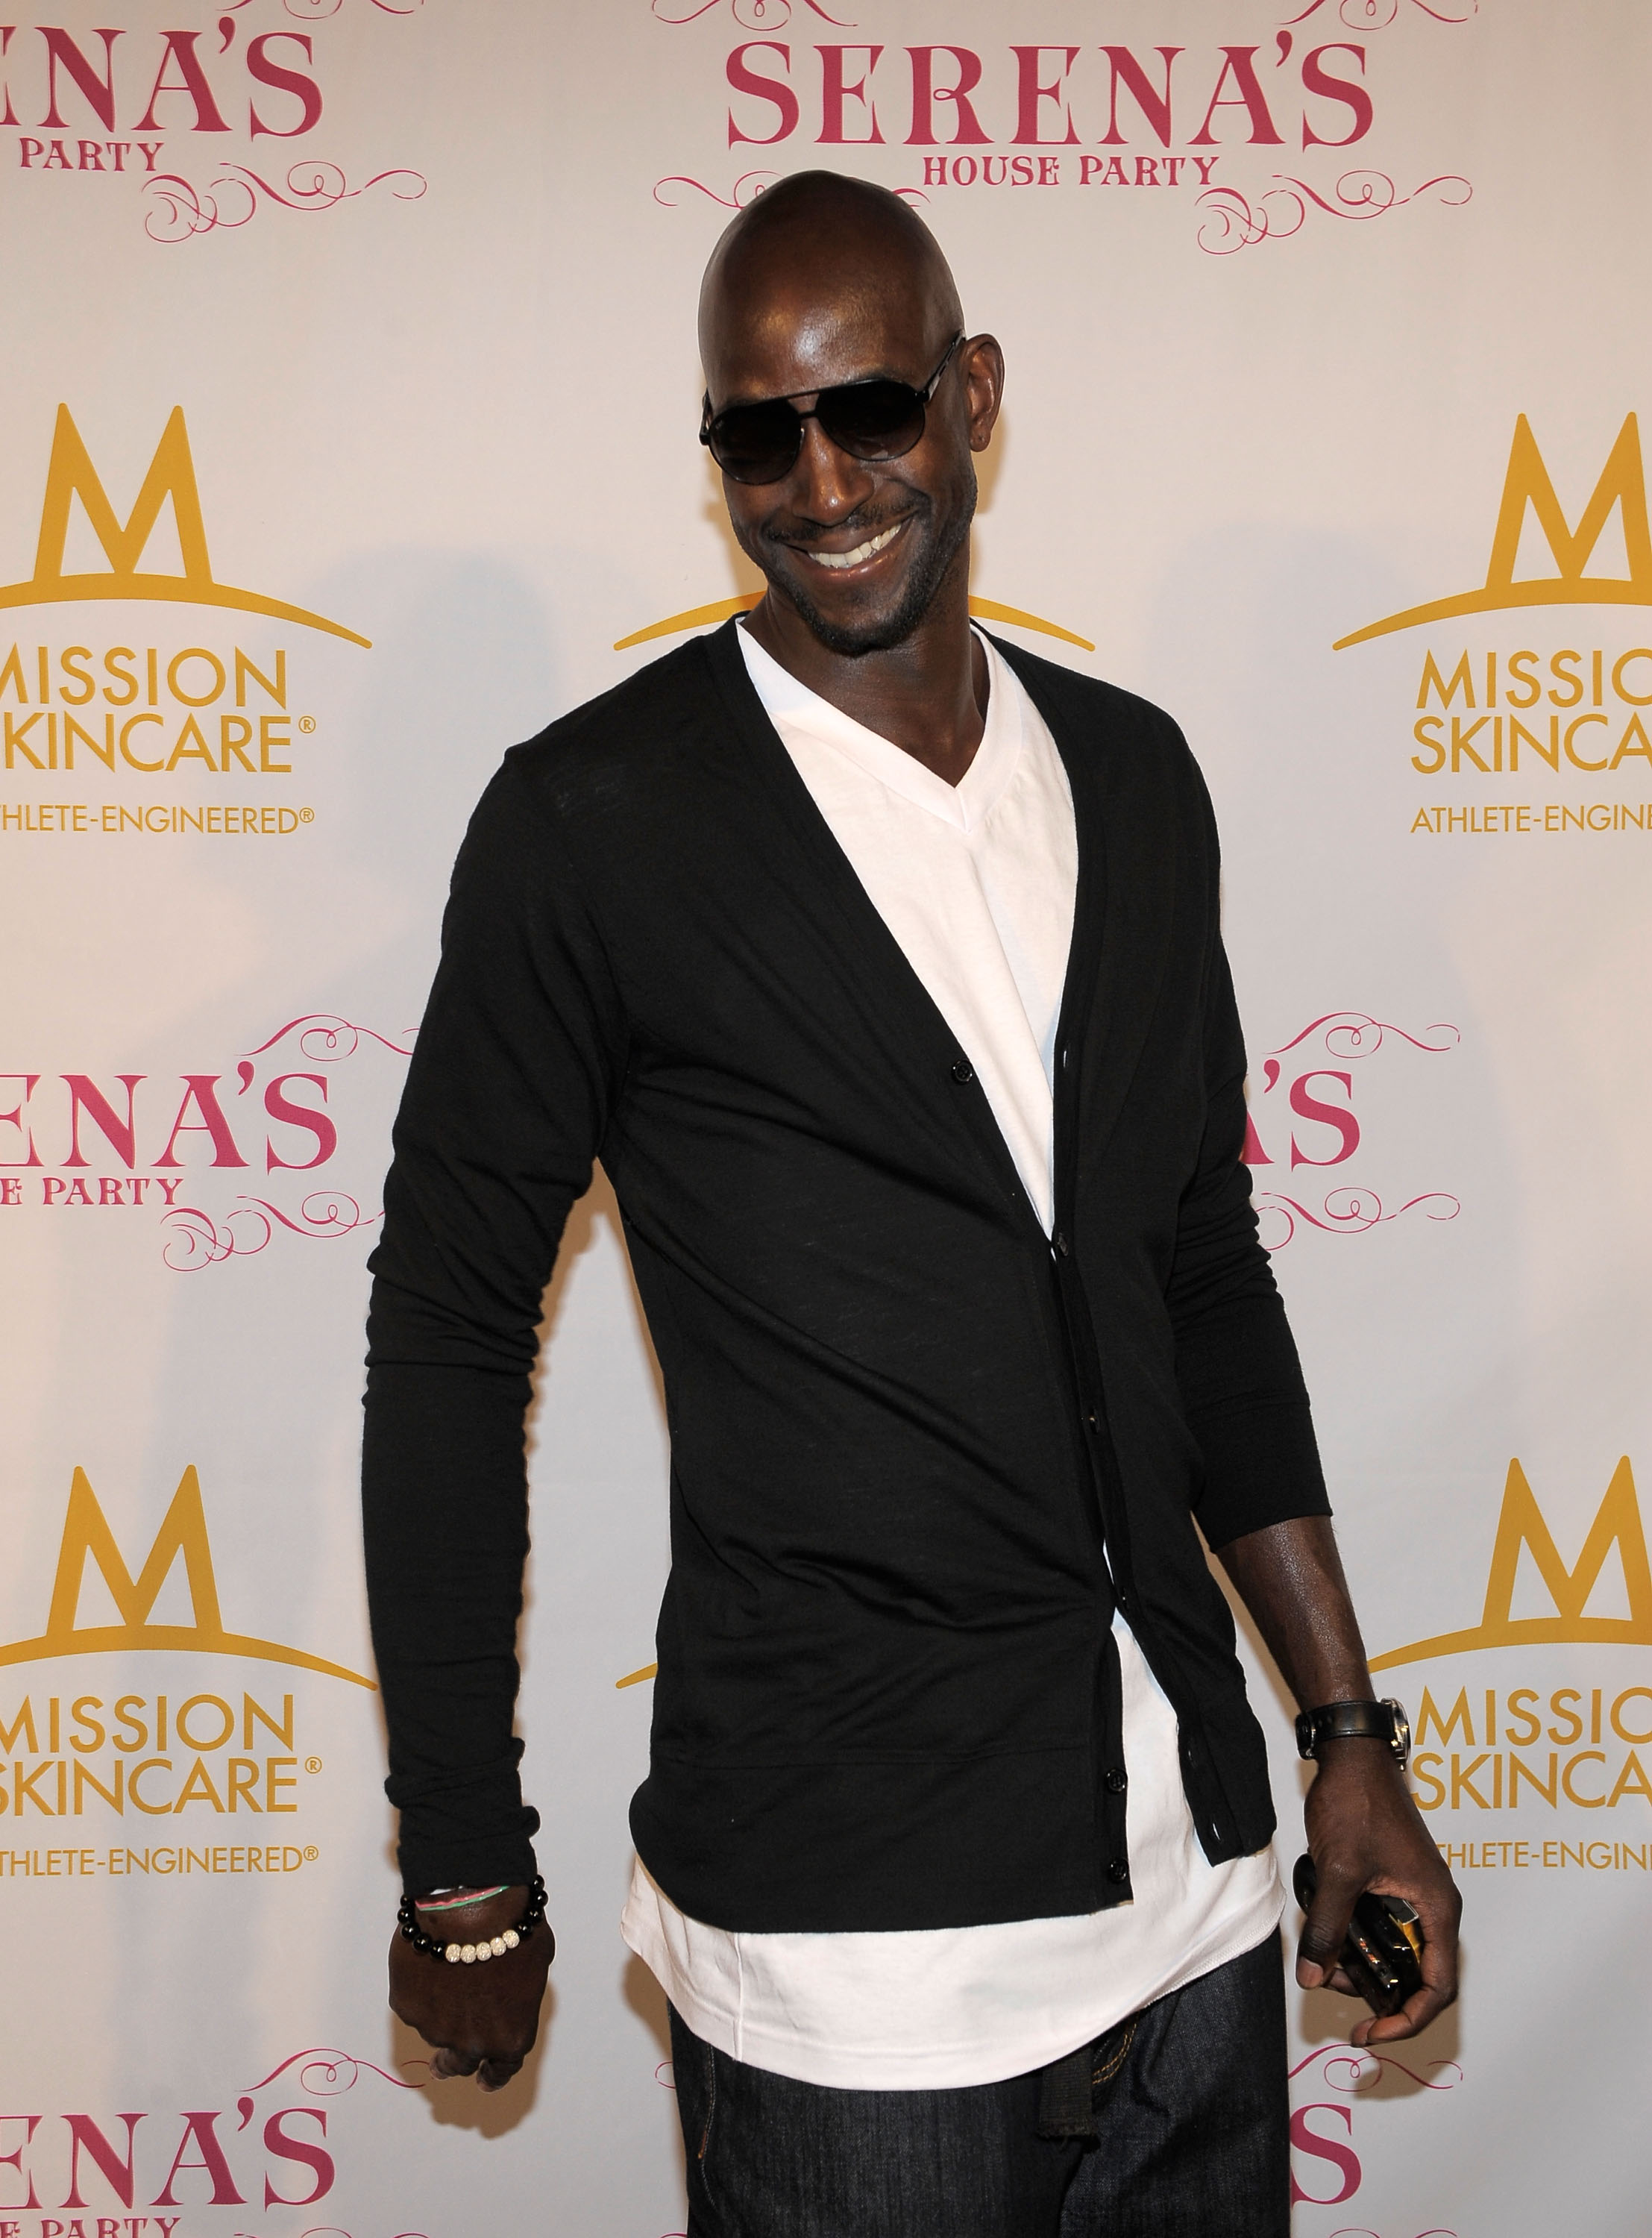 BEL AIR, CA - JULY 12:  NBA basketball player Kevin Garnett attends professional tennis player Serena Williams' Pre-ESPYs House Party held at a private residence on July 12, 2010 in Bel Air, California.  (Photo by Charley Gallay/Getty Images for SW)